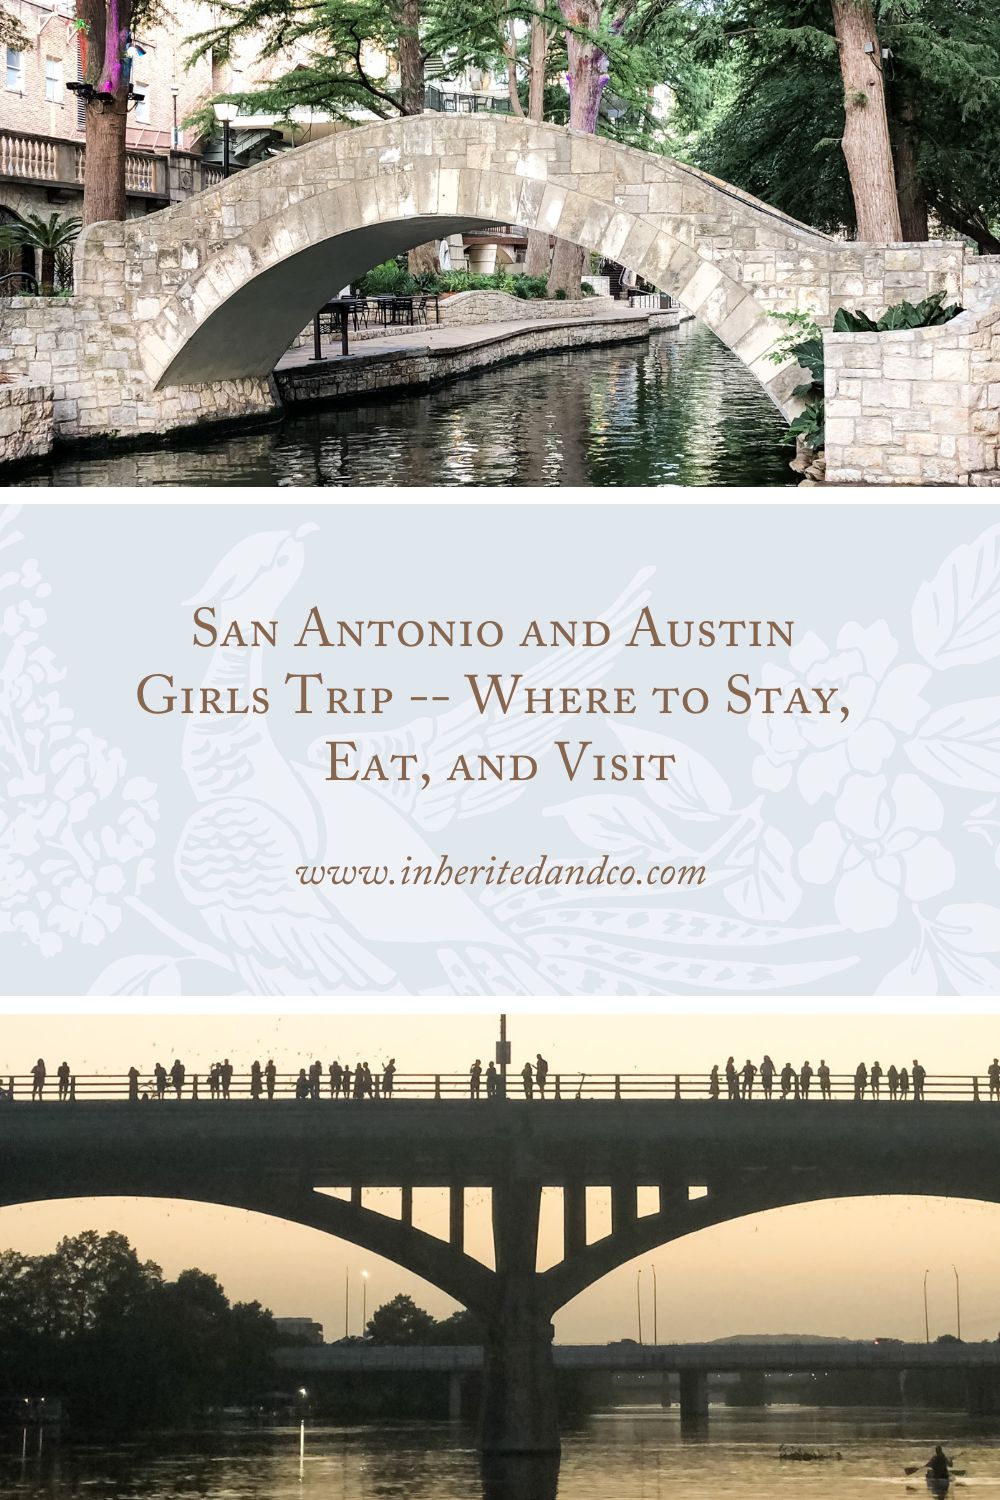 "San Antonio and Austin Girls Trip--Where to Stay, Eat, and Visit"